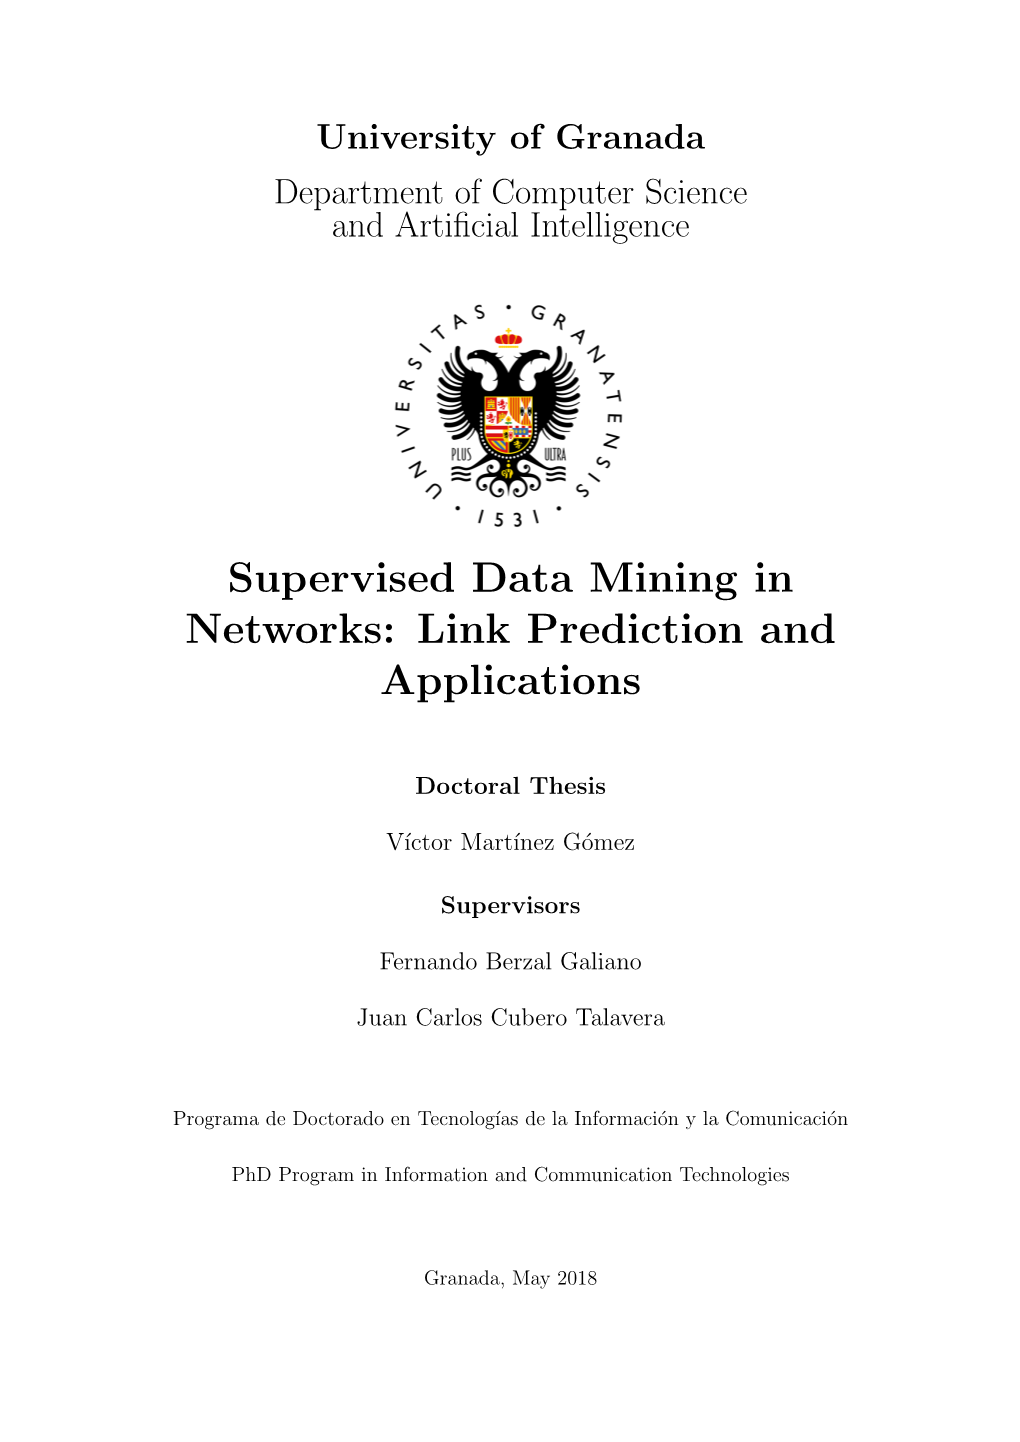 Supervised Data Mining in Networks: Link Prediction and Applications